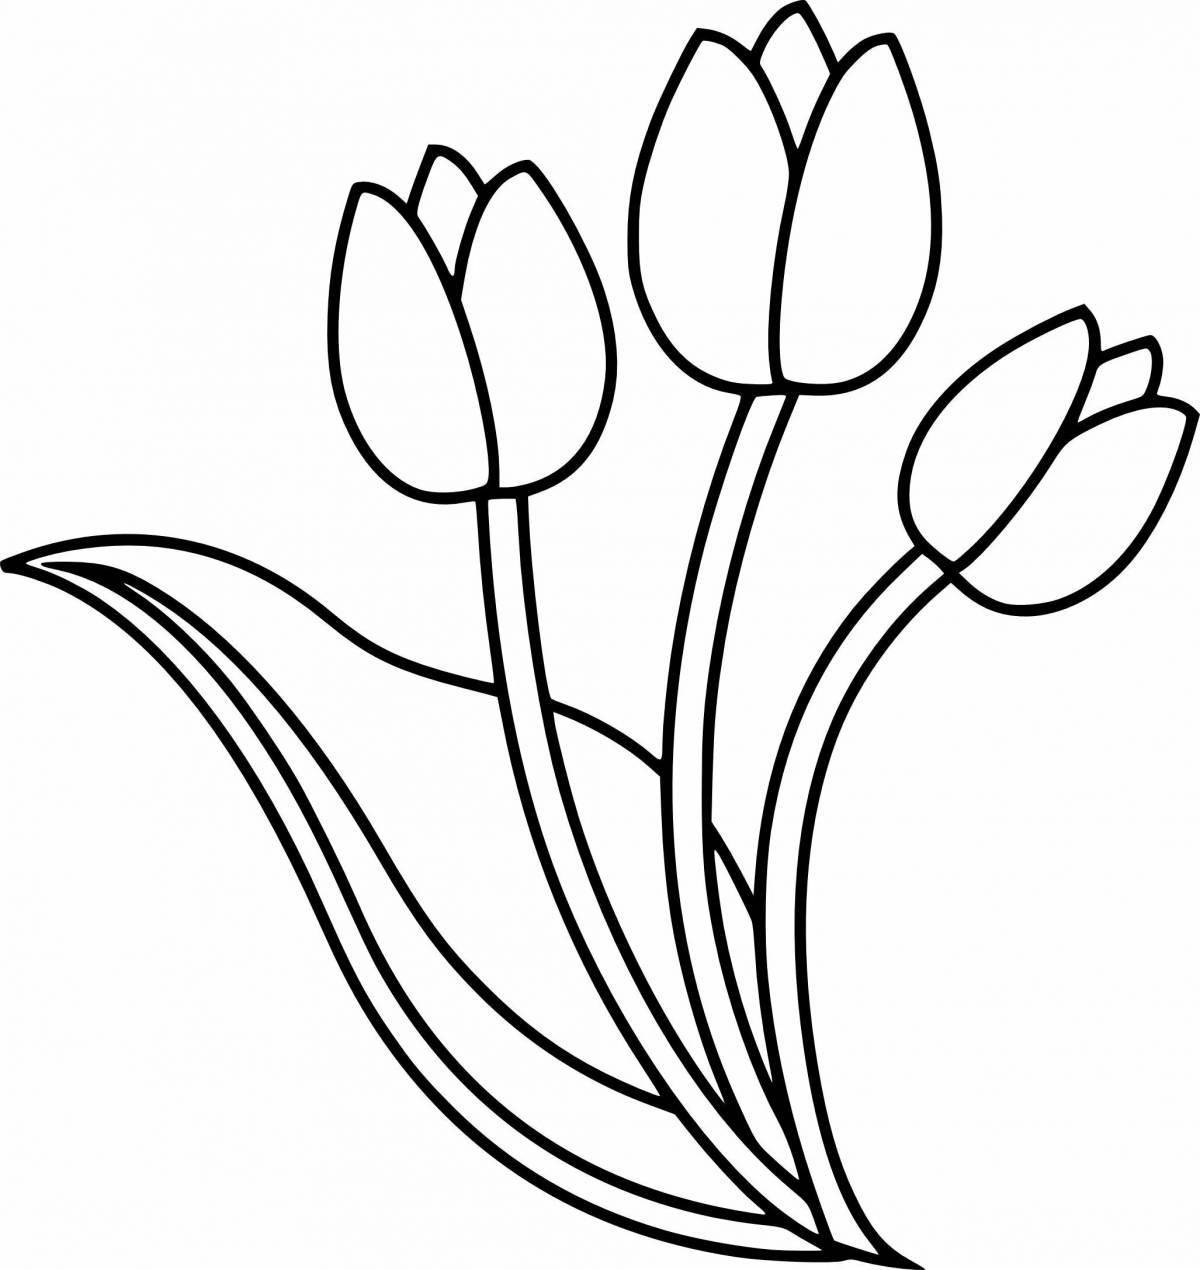 Coloring page festive spring tulips